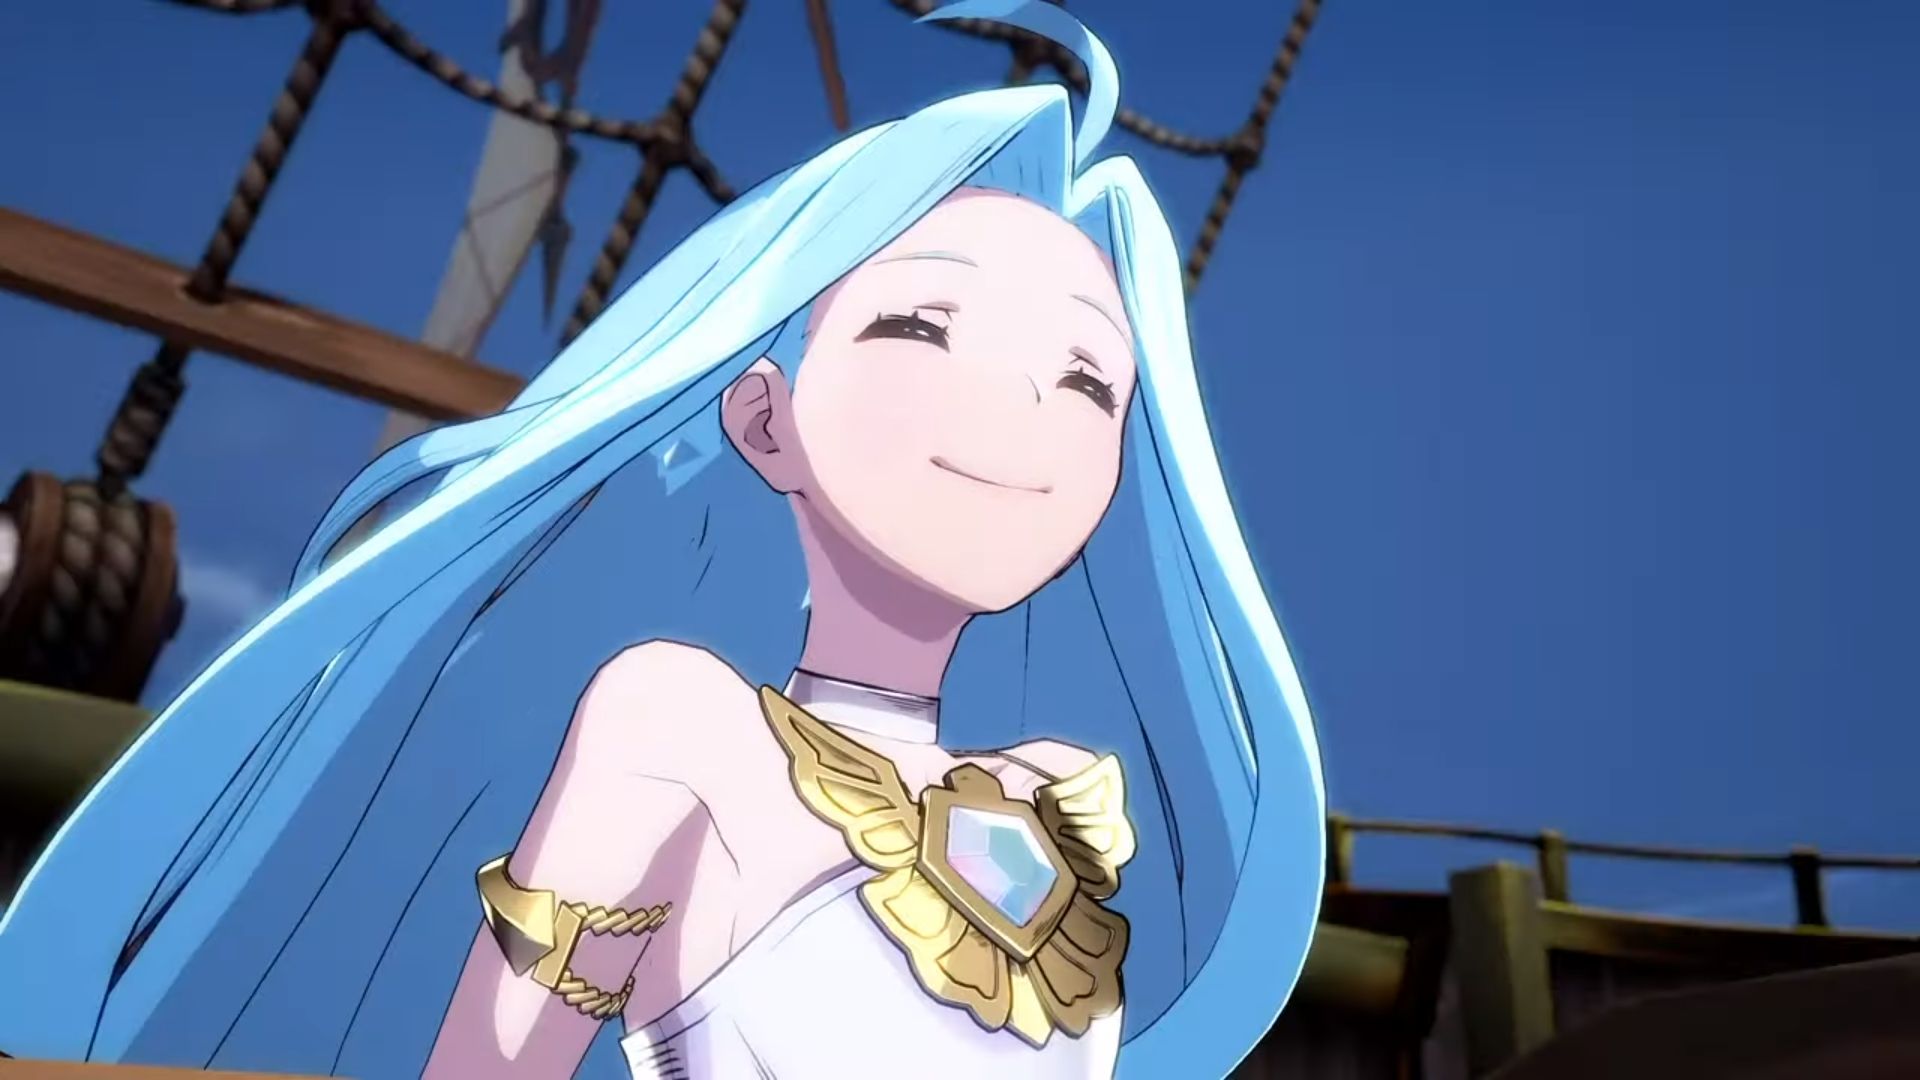 New promotional video for the game Granblue Fantasy: Versus